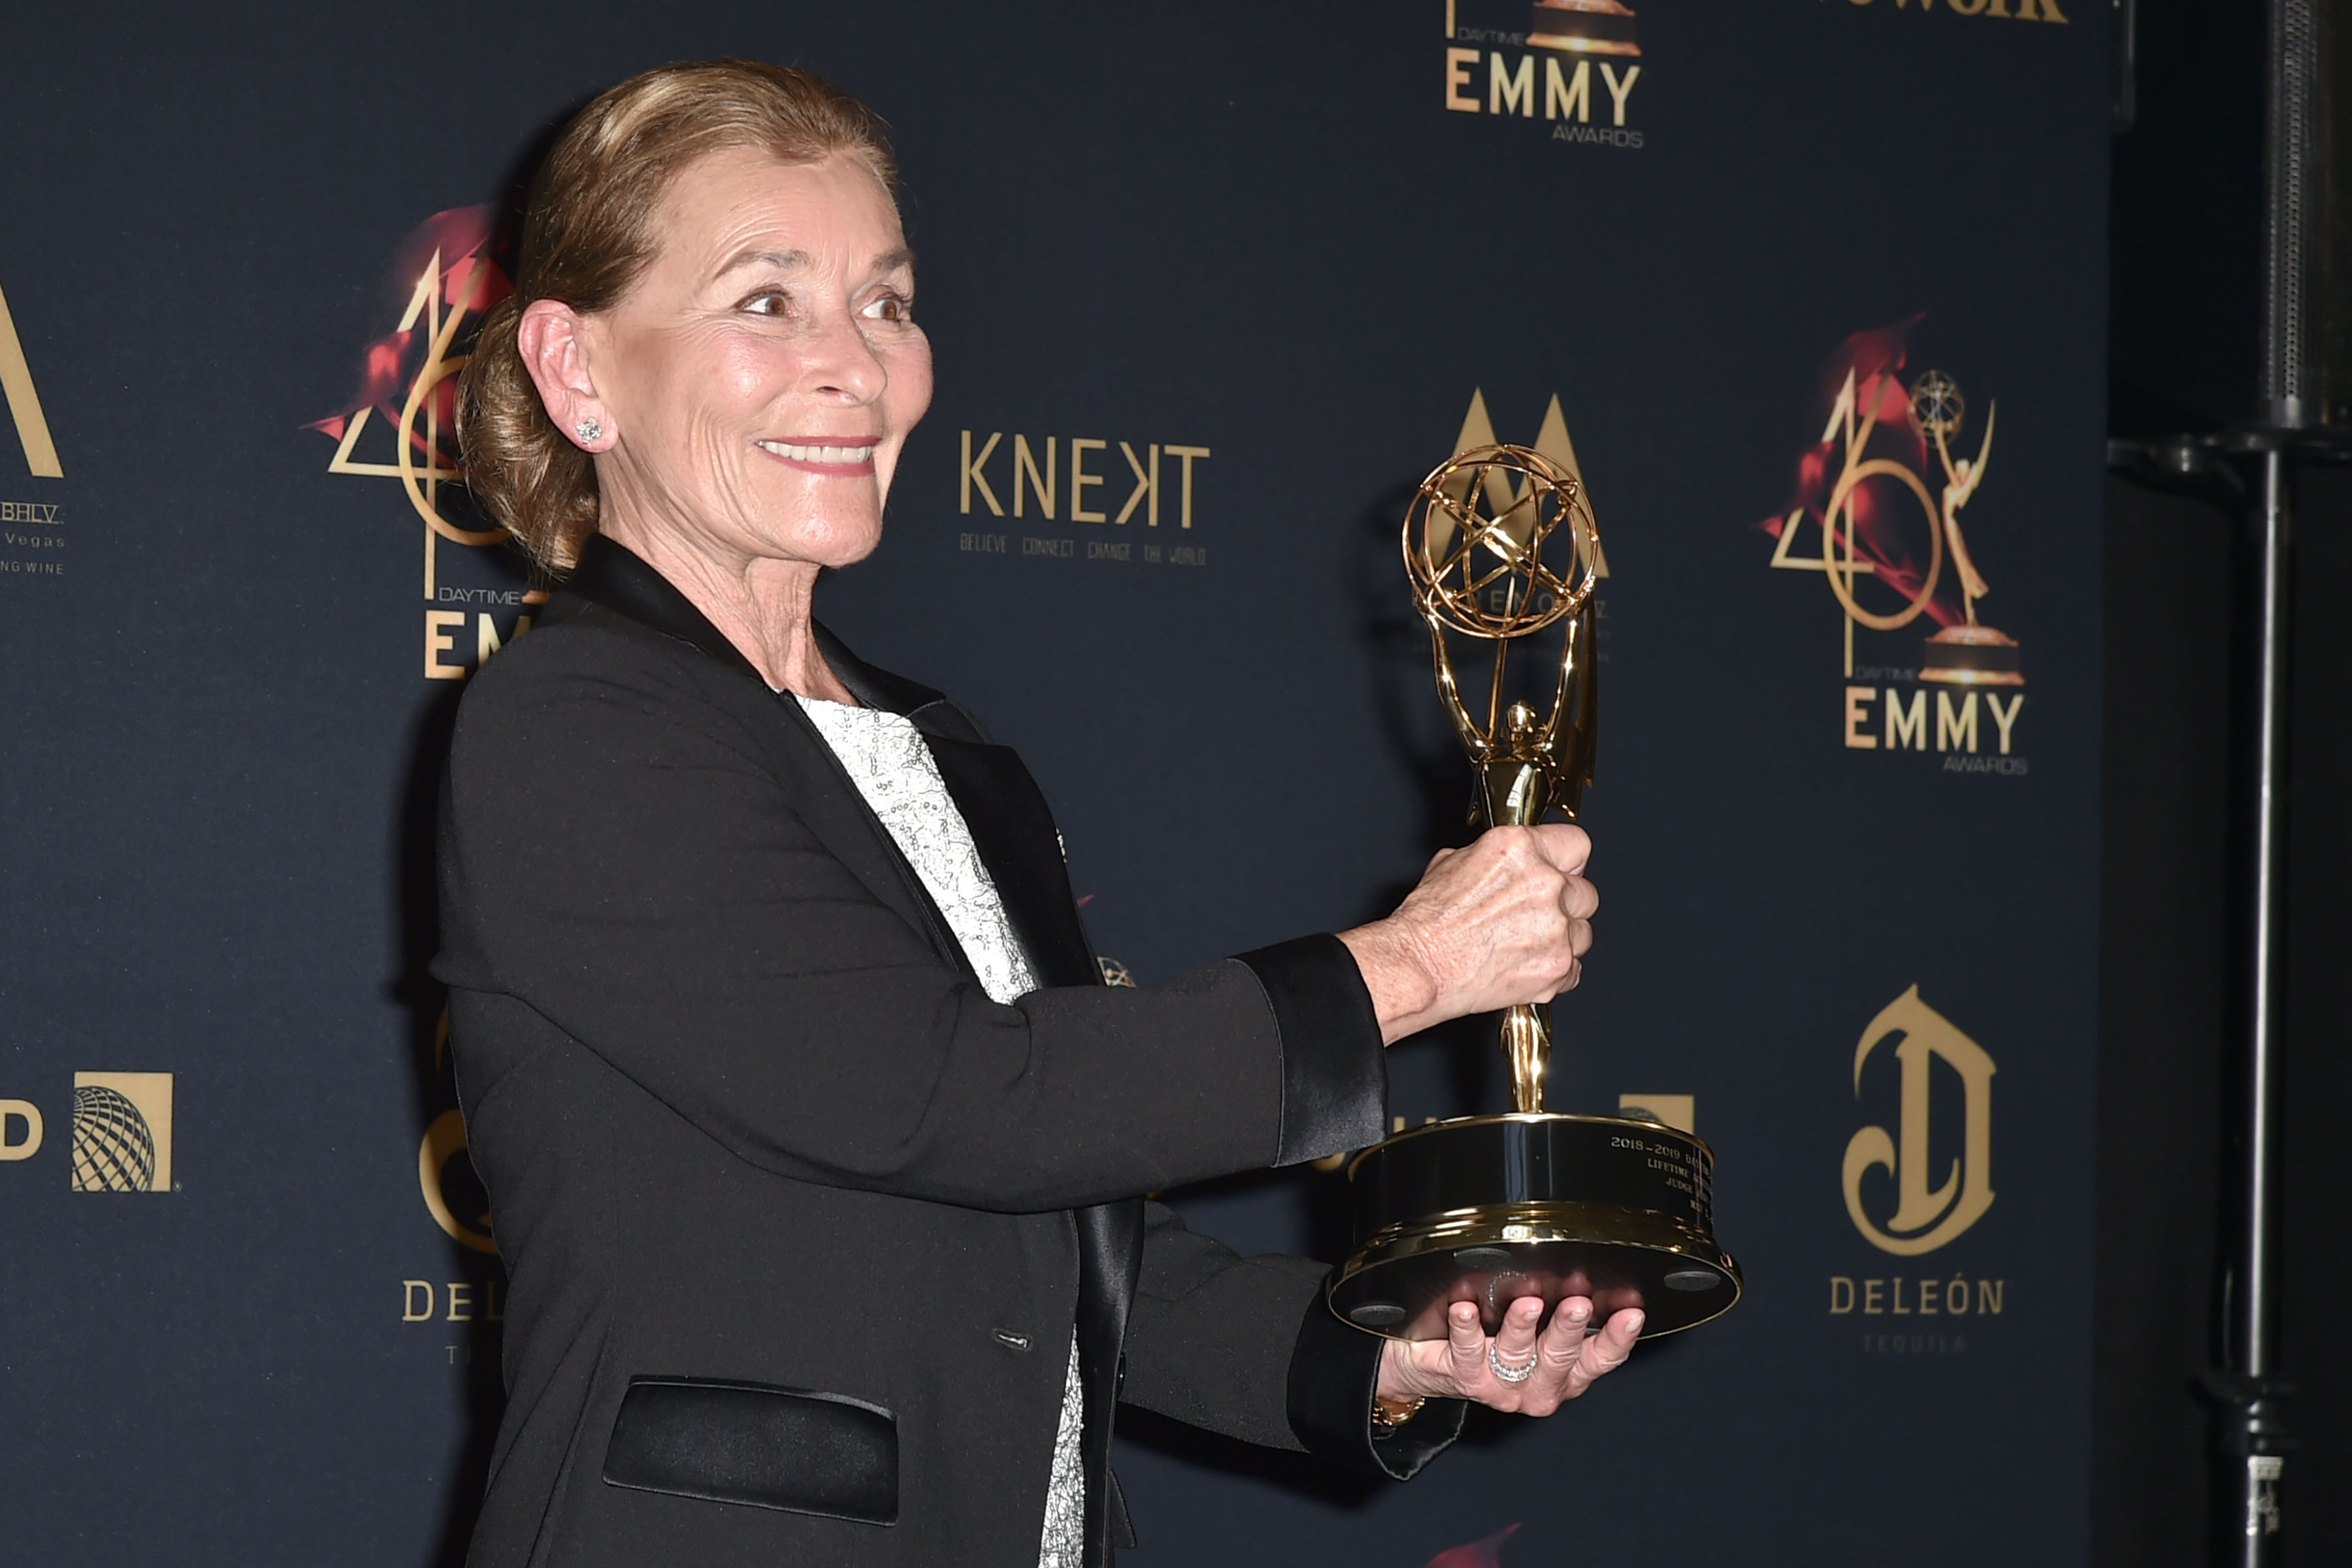 Judge Judy Sheindlin with her Lifetime Achievement Award at the 46th Annual Daytime Emmy Awards - Press Room on May 5, 2019, in Pasadena, California | Source: Getty Images